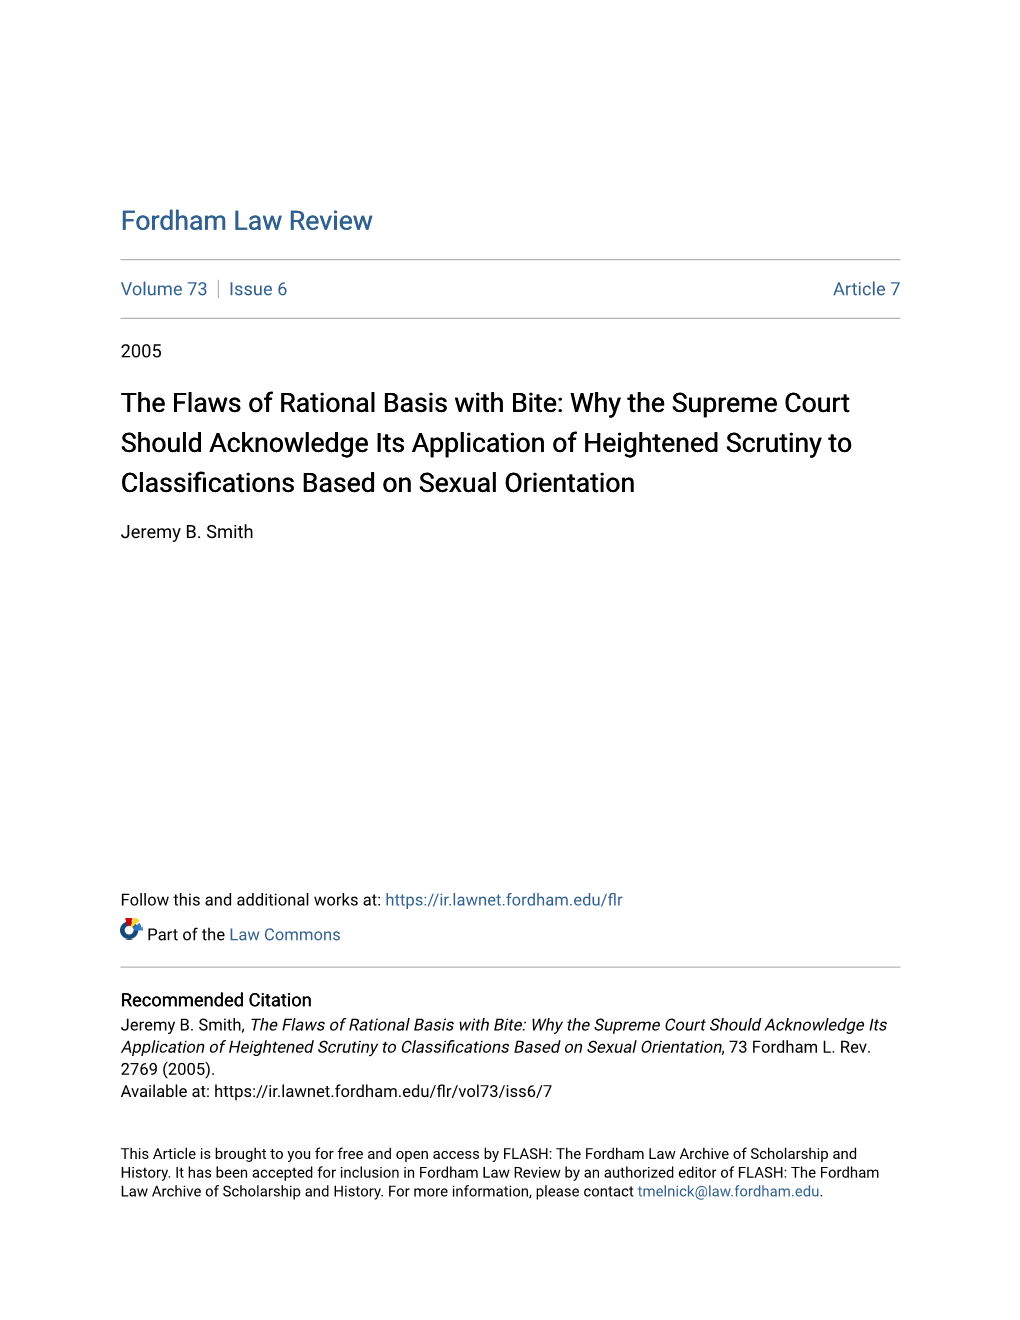 The Flaws of Rational Basis with Bite: Why the Supreme Court Should Acknowledge Its Application of Heightened Scrutiny to Classifications Based on Sexual Orientation